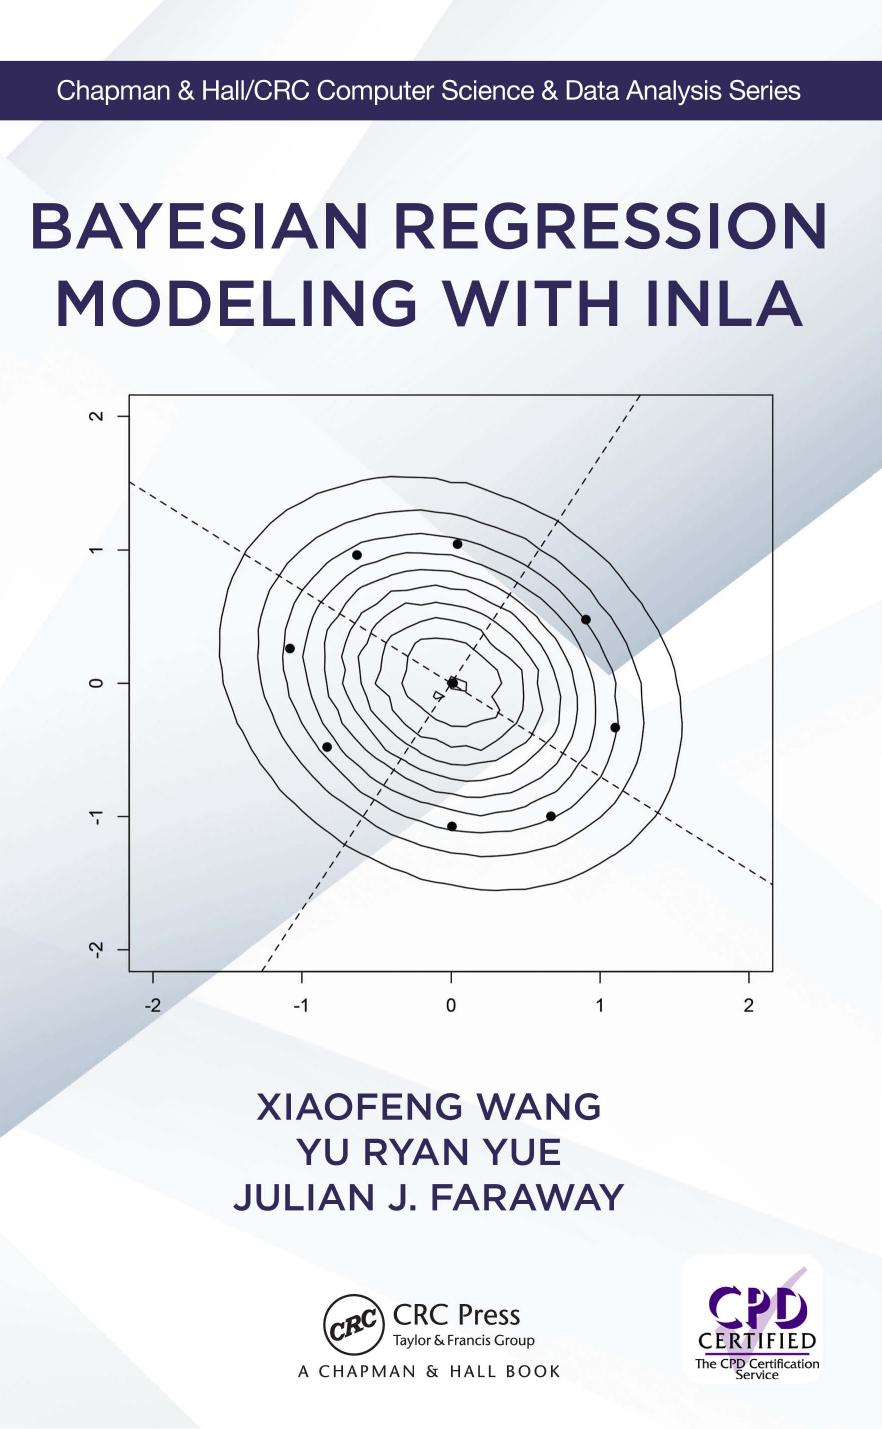 BAYESIAN REGRESSION MODELING WITH INLA